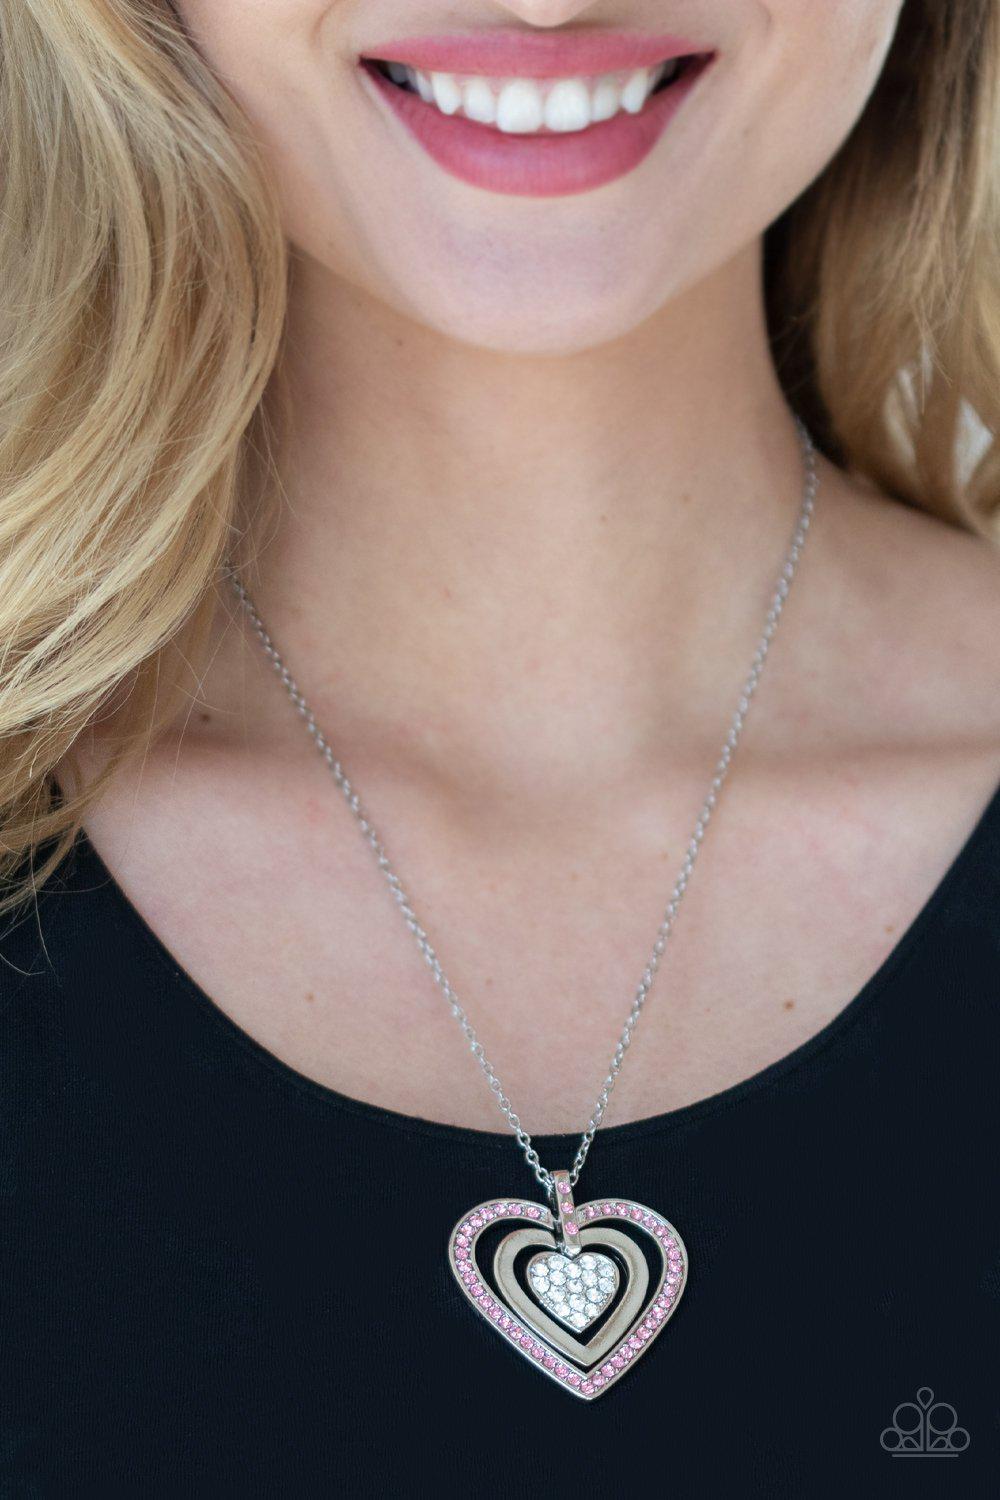 Bless Your Heart Pink and White Rhinestone Heart Necklace - Paparazzi Accessories - model -CarasShop.com - $5 Jewelry by Cara Jewels